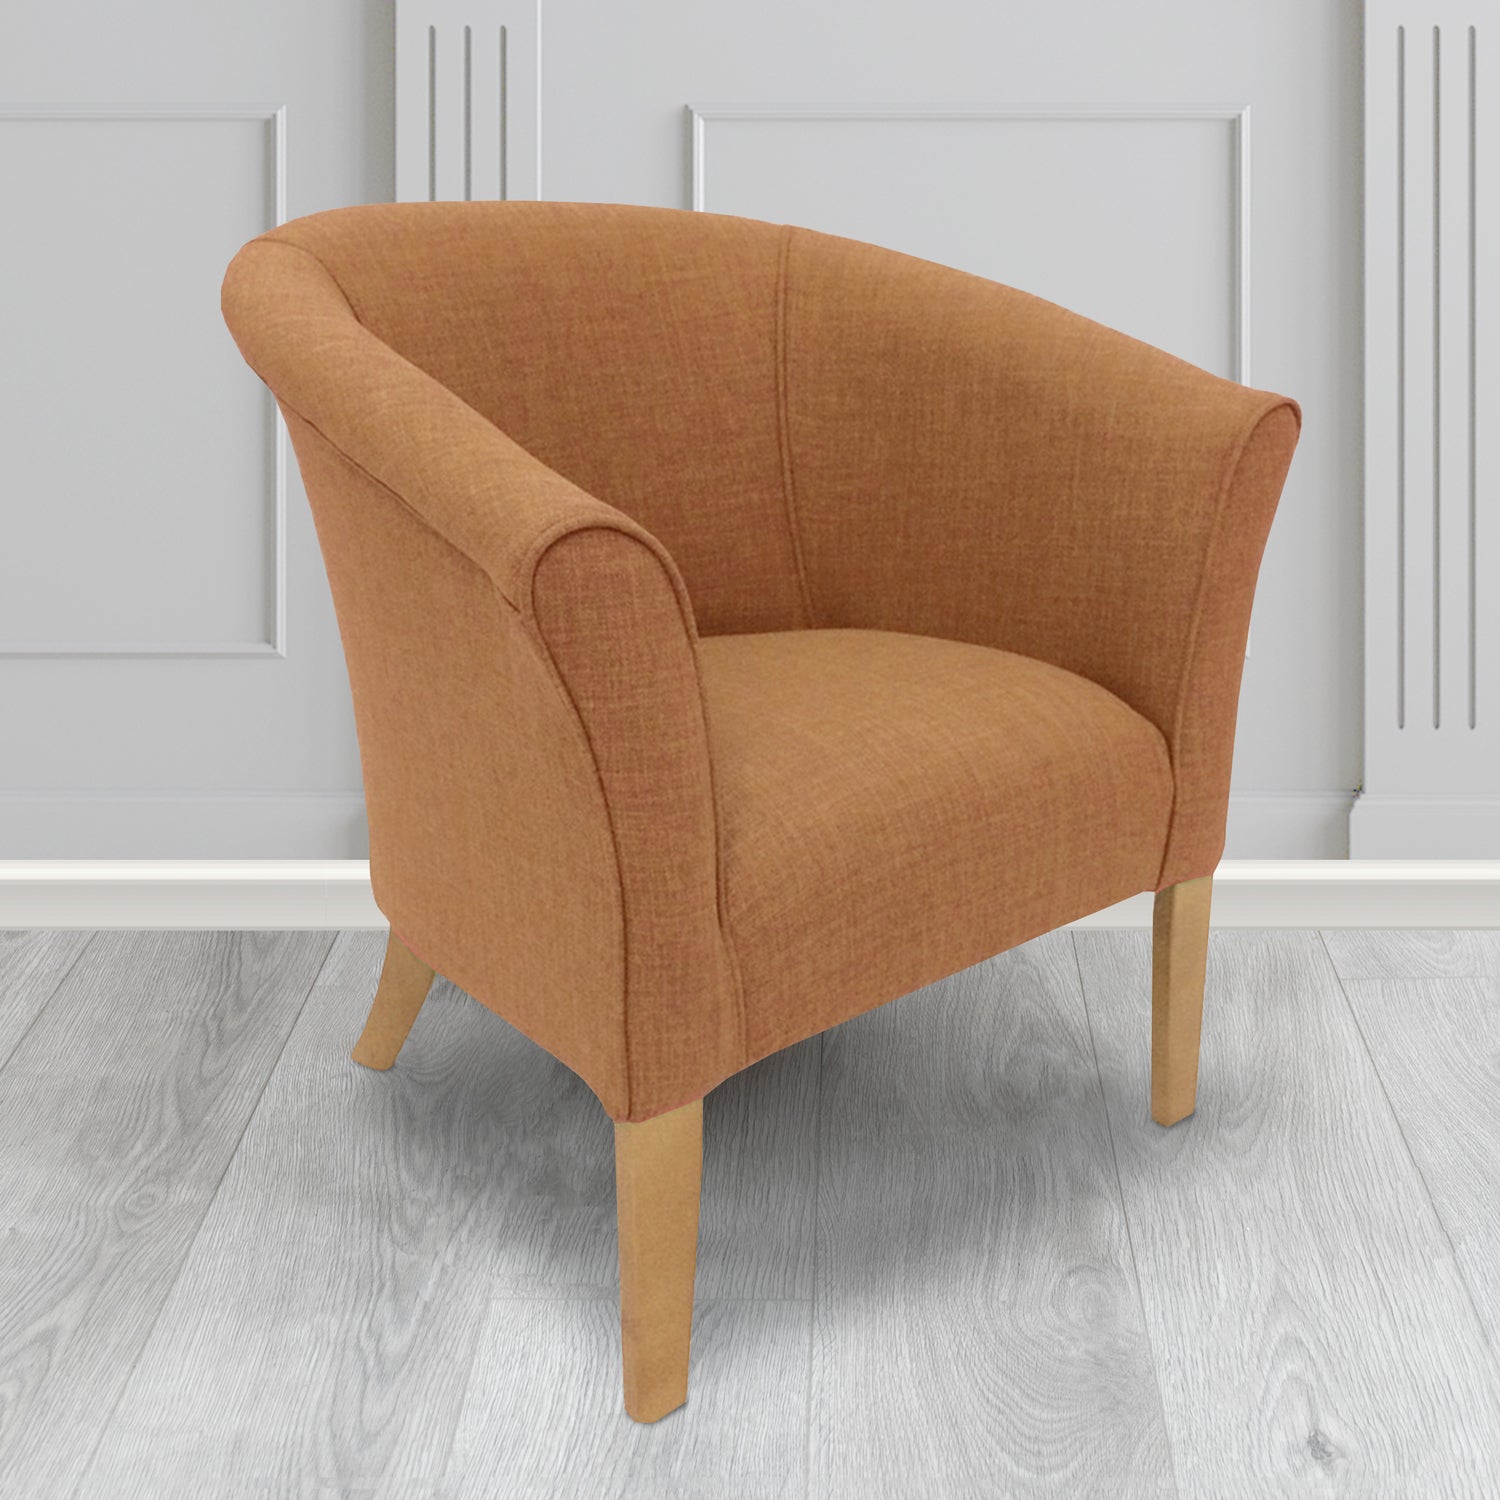 Quill Tub Chair in Linetta Gold Crib 5 Plain Fabric - Antimicrobial, Stain Resistant & Waterproof - The Tub Chair Shop